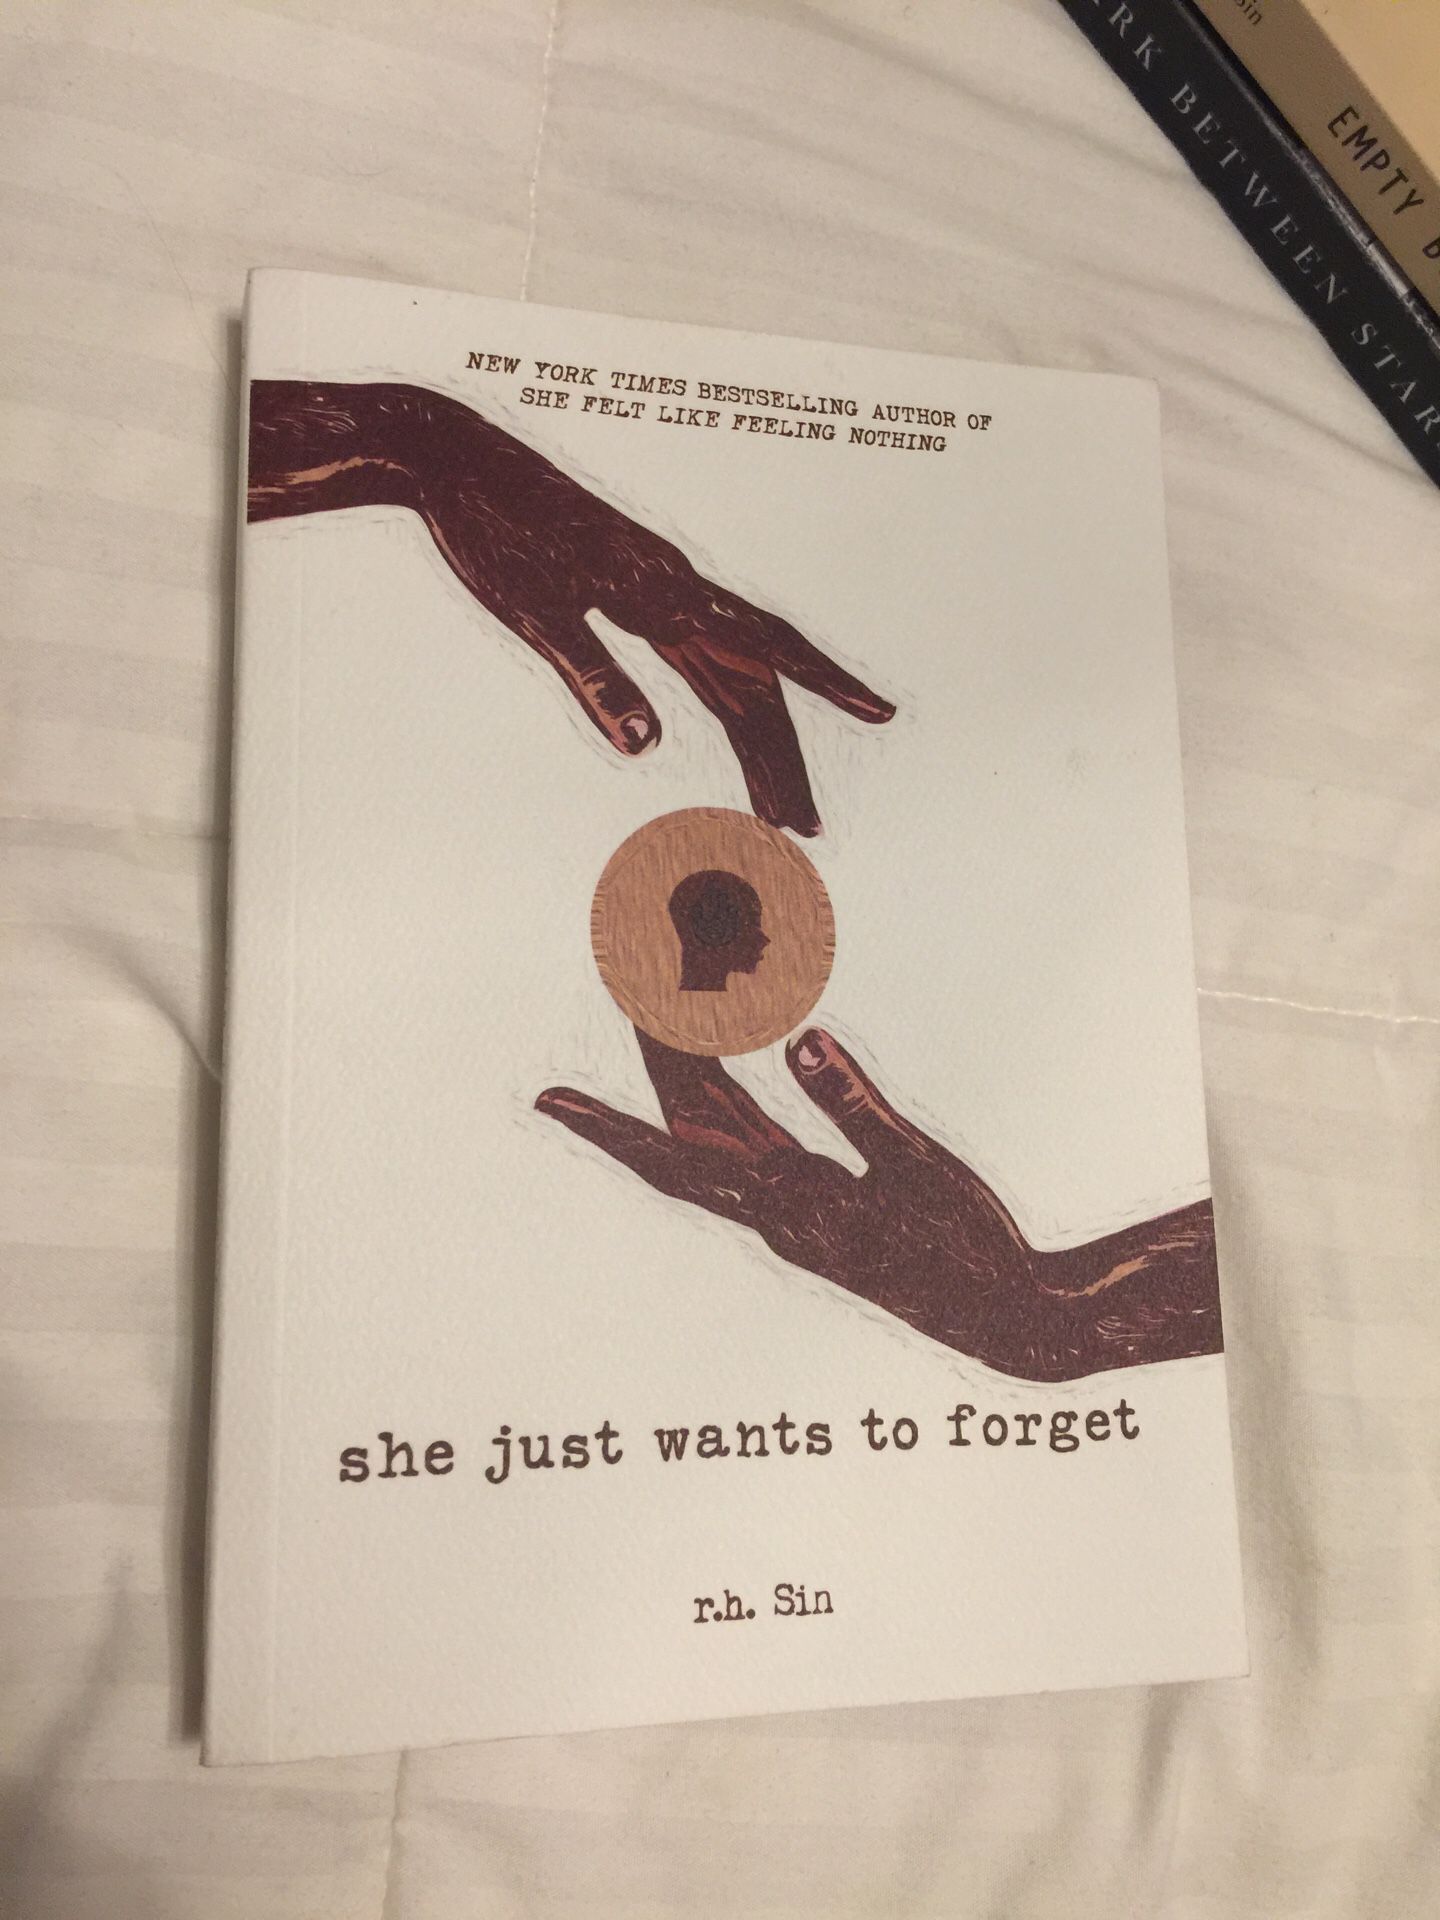 She Just Wants to Forget by r.h. Sin